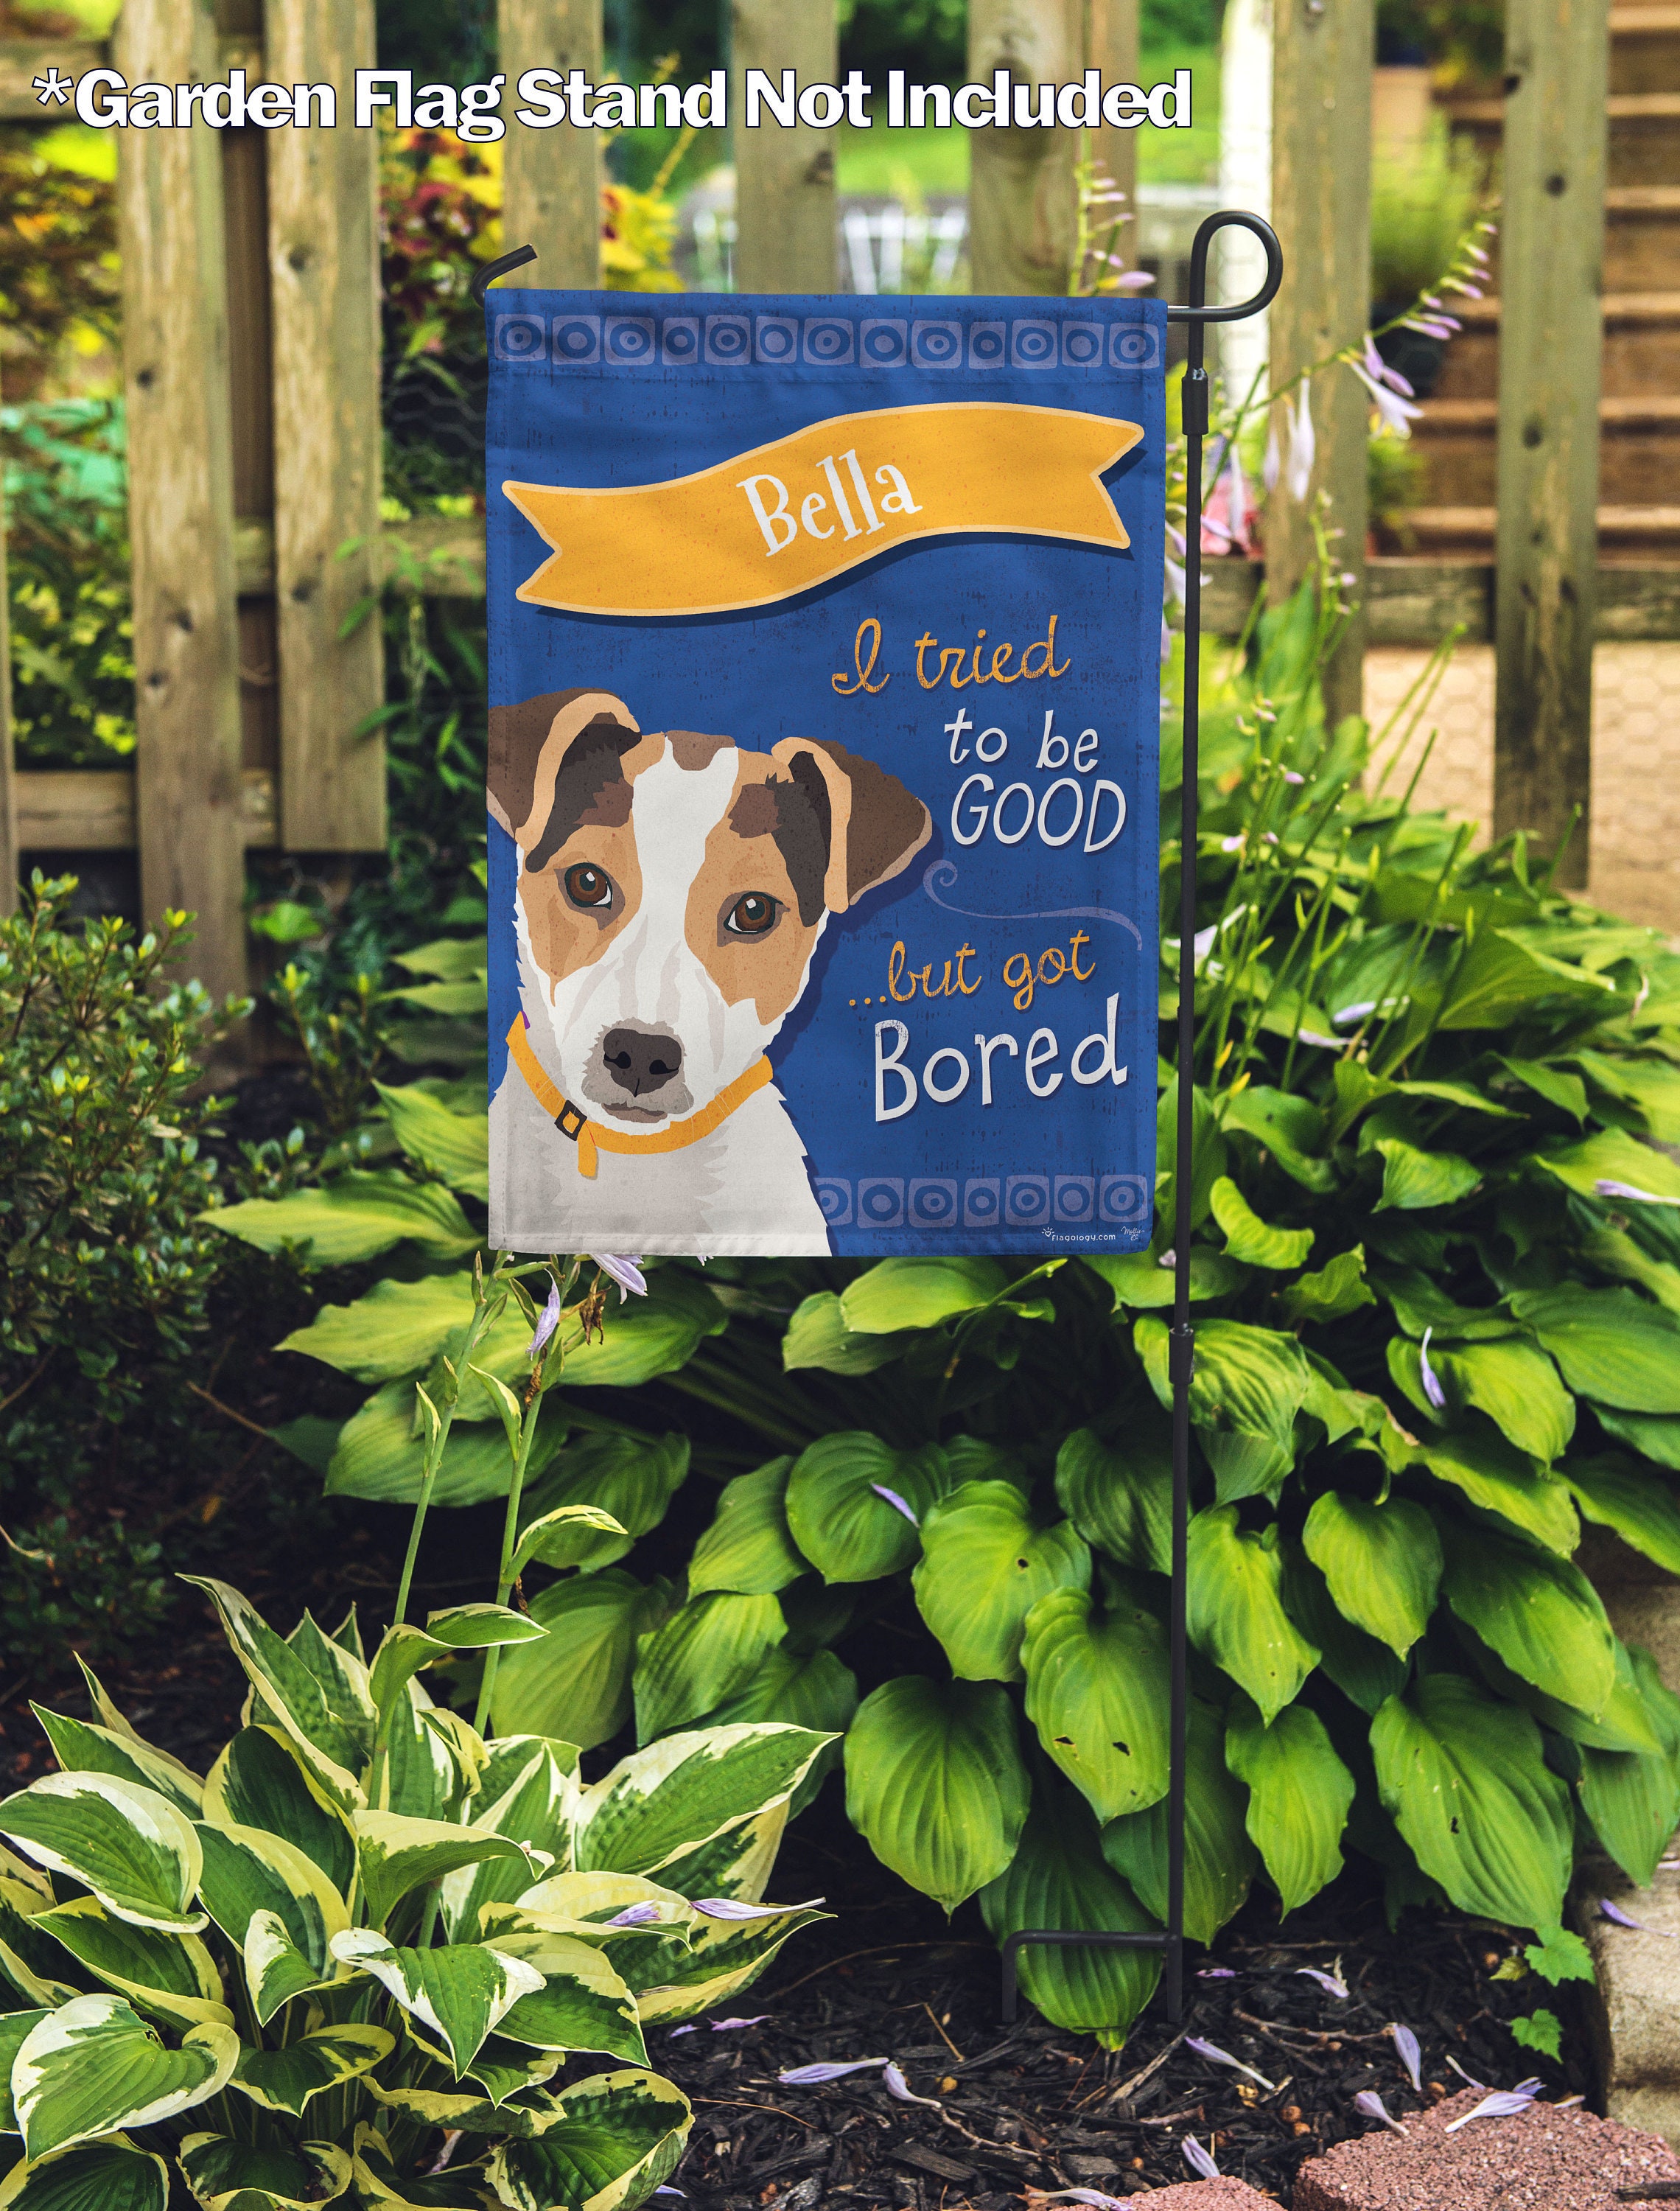 Jack Russell Terrier House Flags and Garden Flags by Pipsqueak 2 sizes #49861 1 